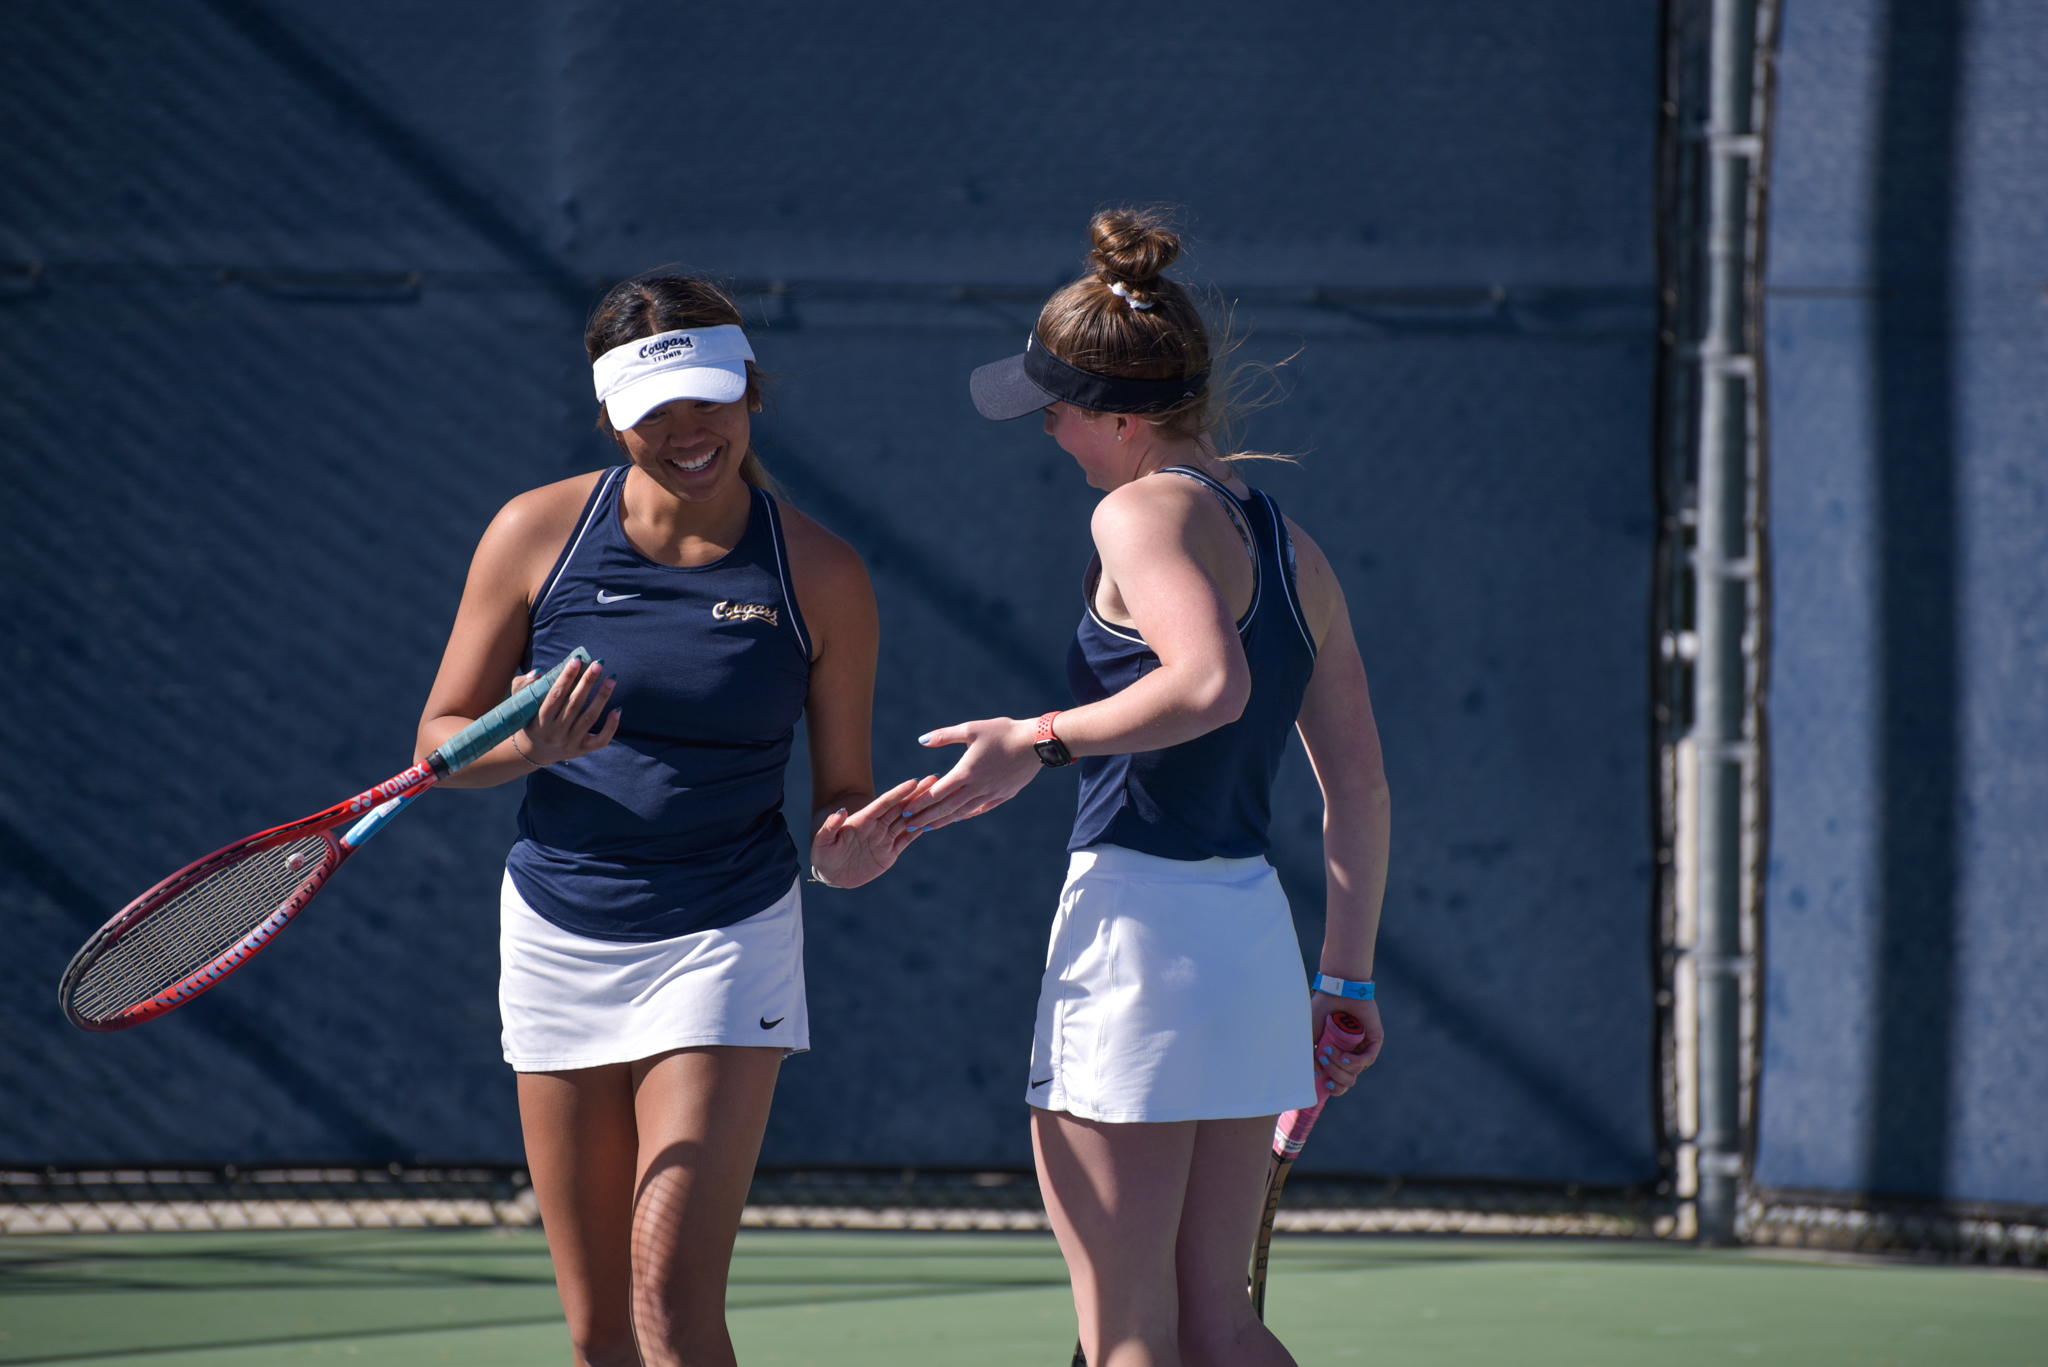 College of the Canyons women's tennis vs. Glendale on Feb. 22, 2022.